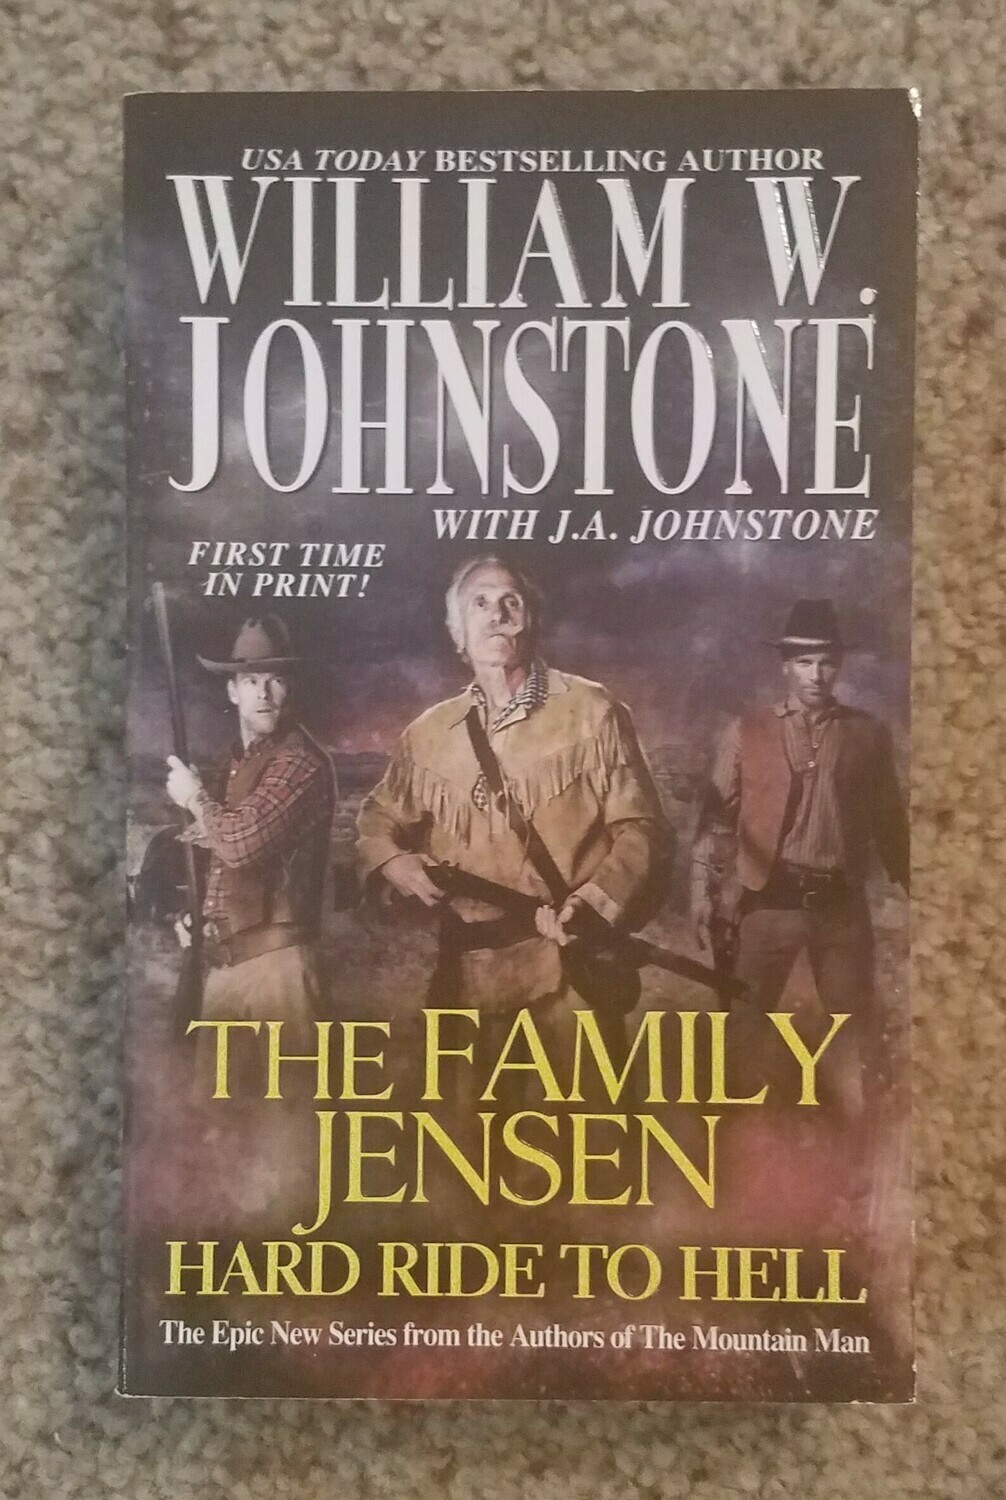 The Family Jensen: Hard Ride to Hell by William W. Johnstone with J.A. Johnstone